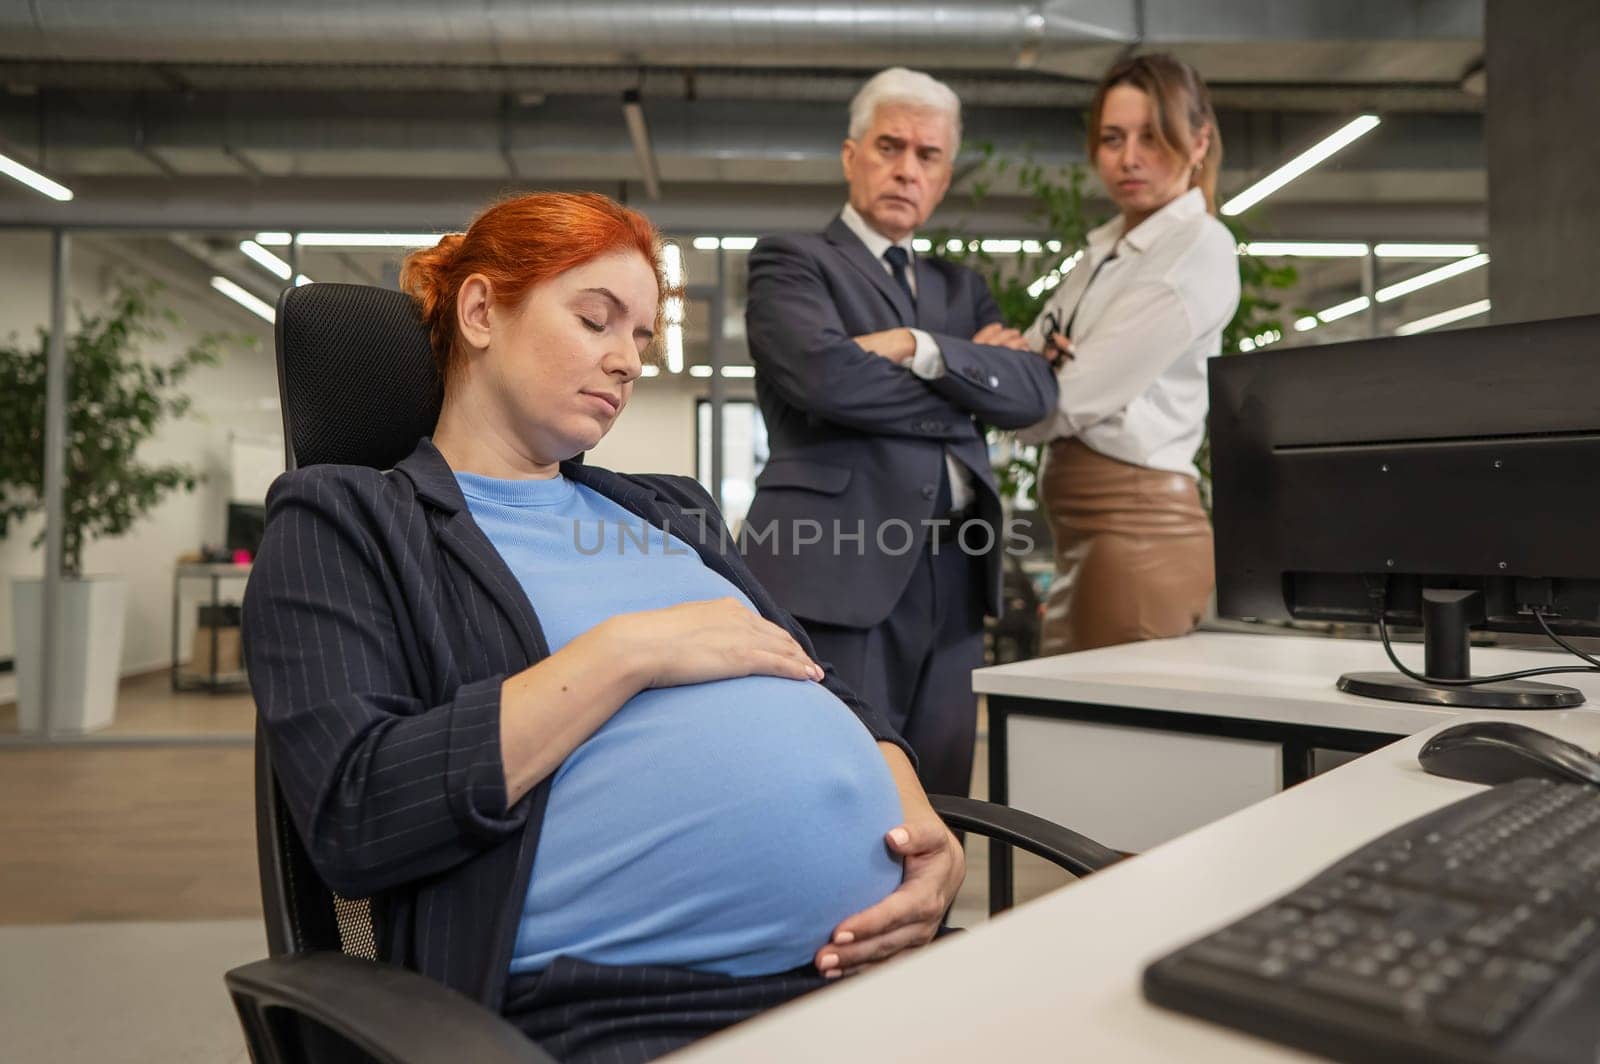 A pregnant woman sleeps at her workplace. Colleagues look disapprovingly. by mrwed54